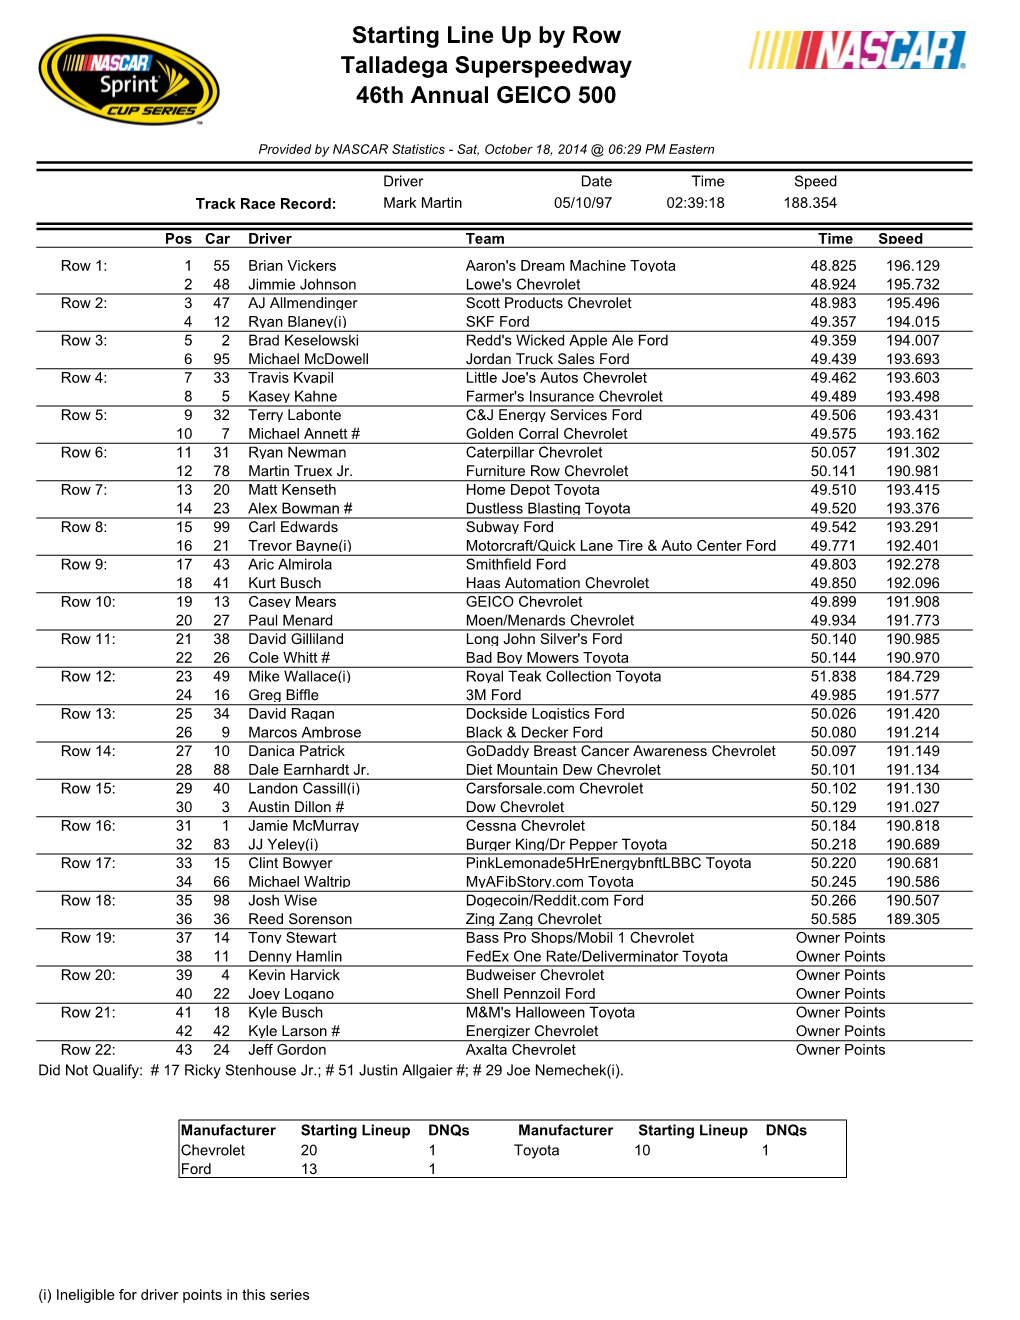 Starting Line up by Row Talladega Superspeedway 46Th Annual GEICO 500